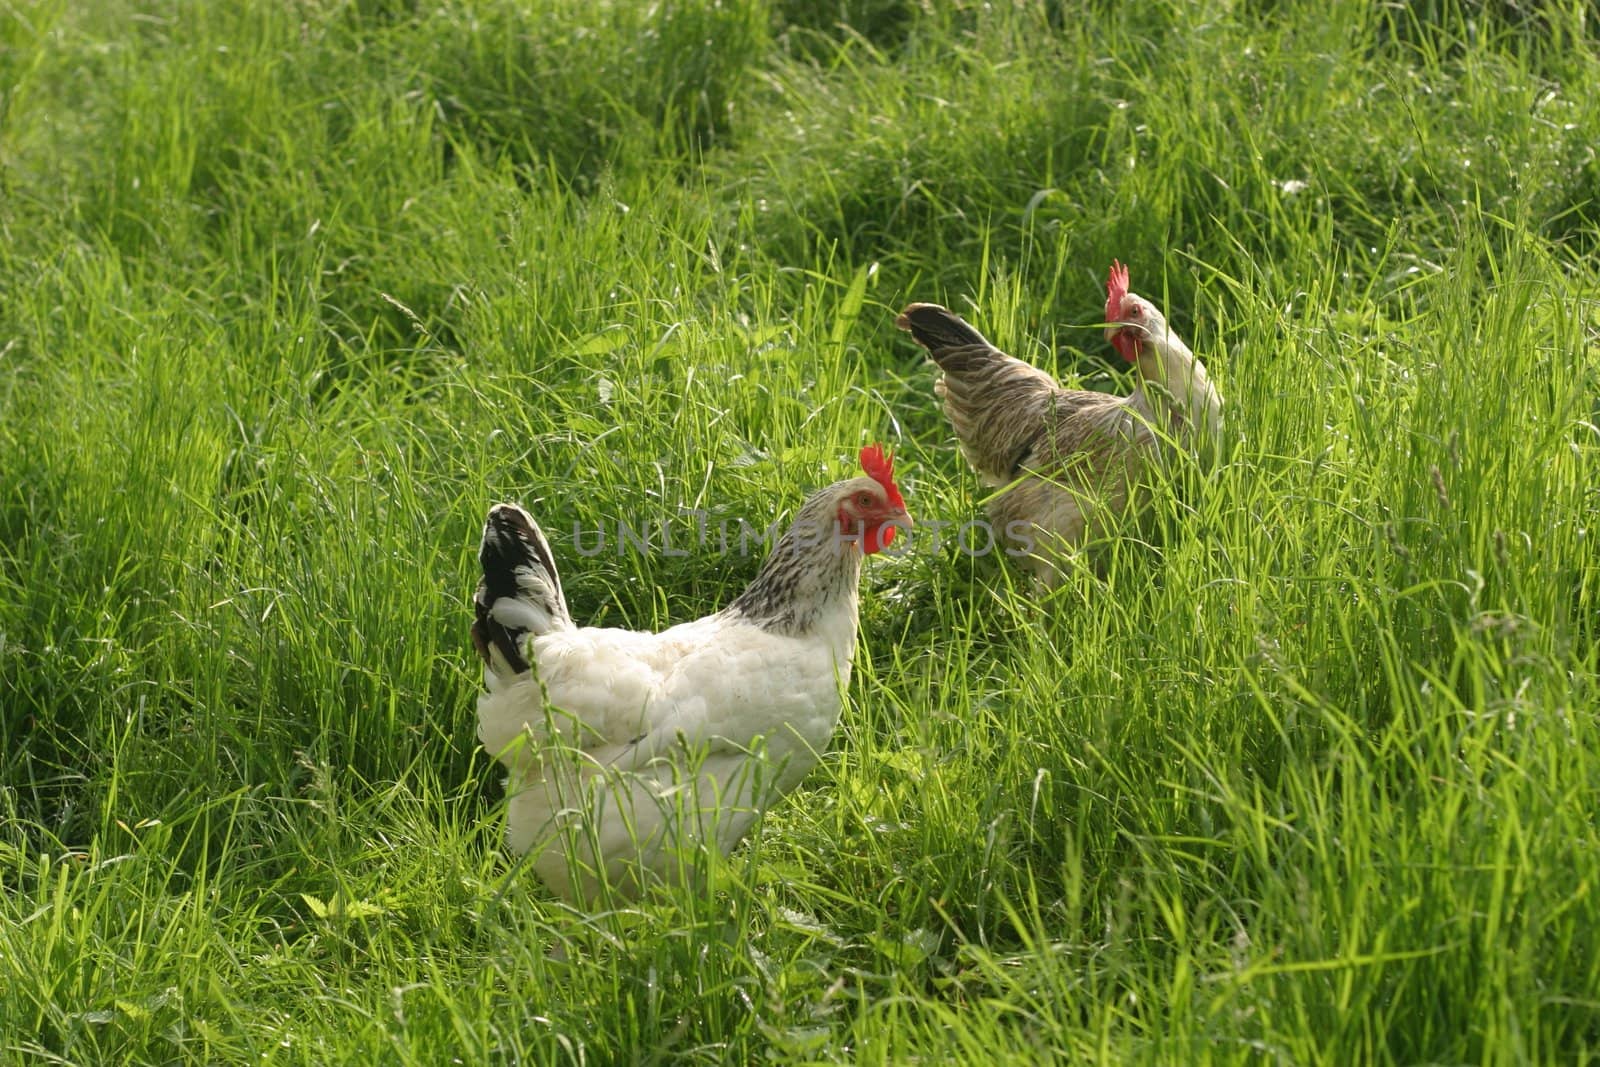 Group of hens with rooster on the farm yard